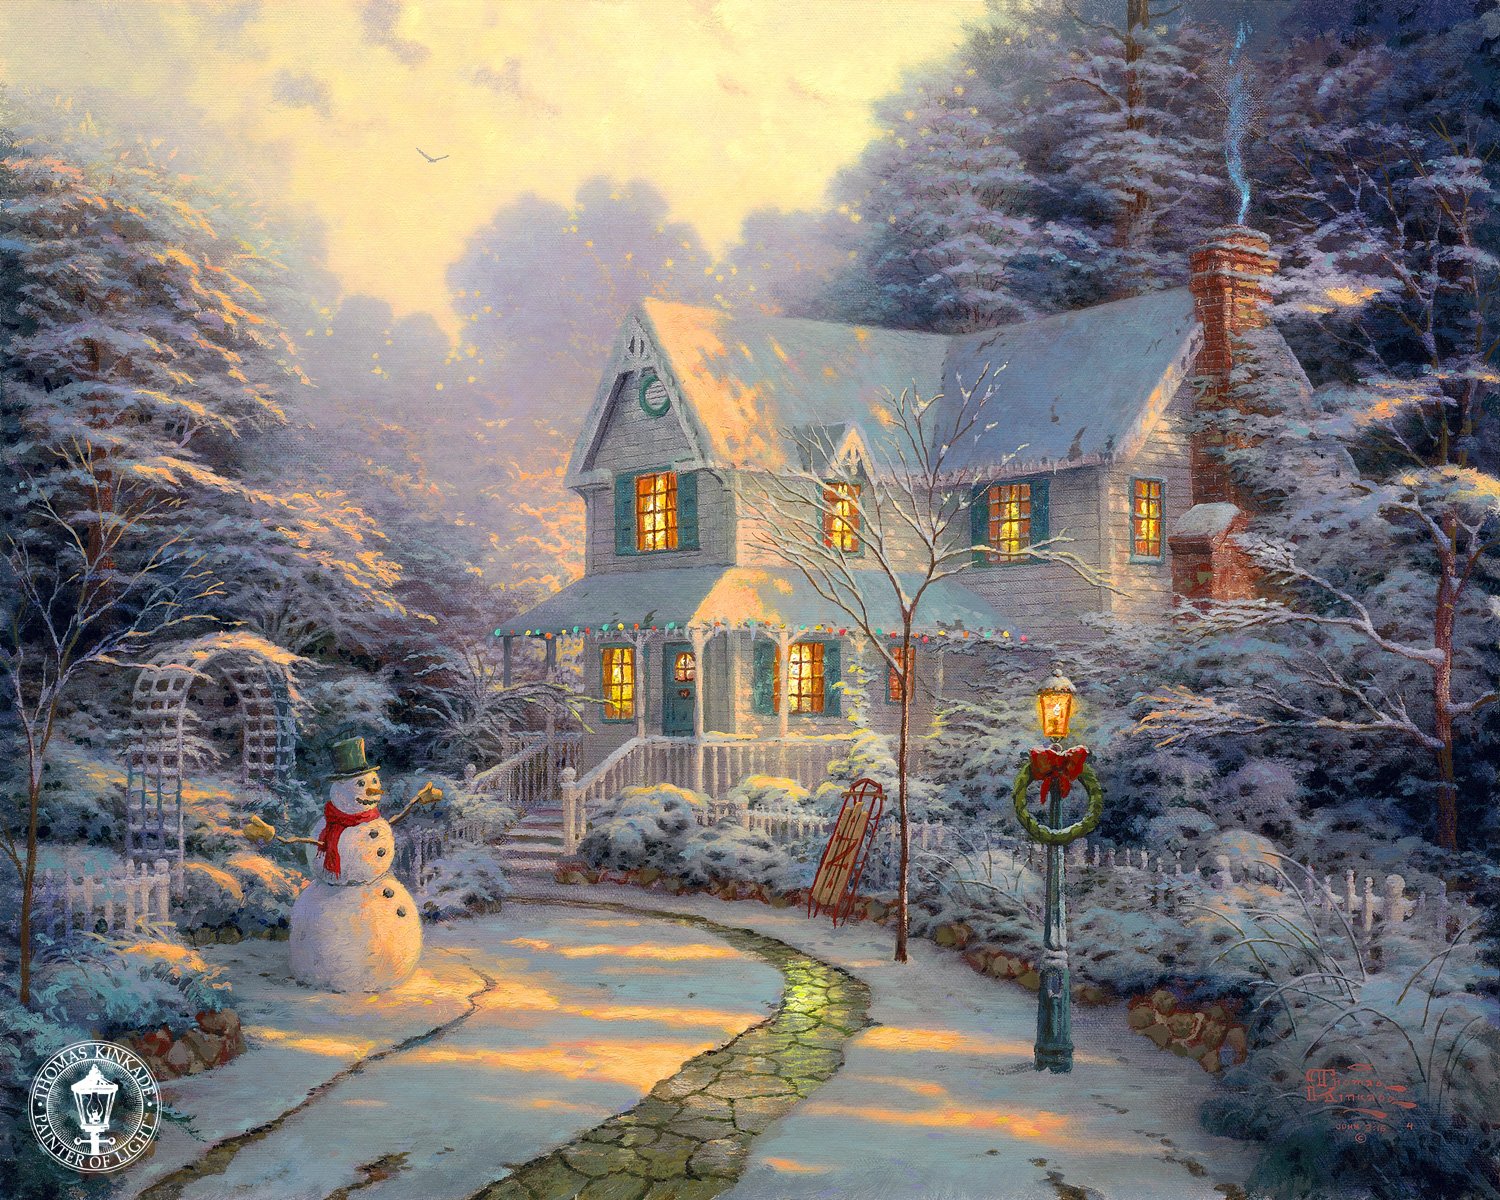 He Has Paintings Of All Different Scenes The Nice Cozy Winter